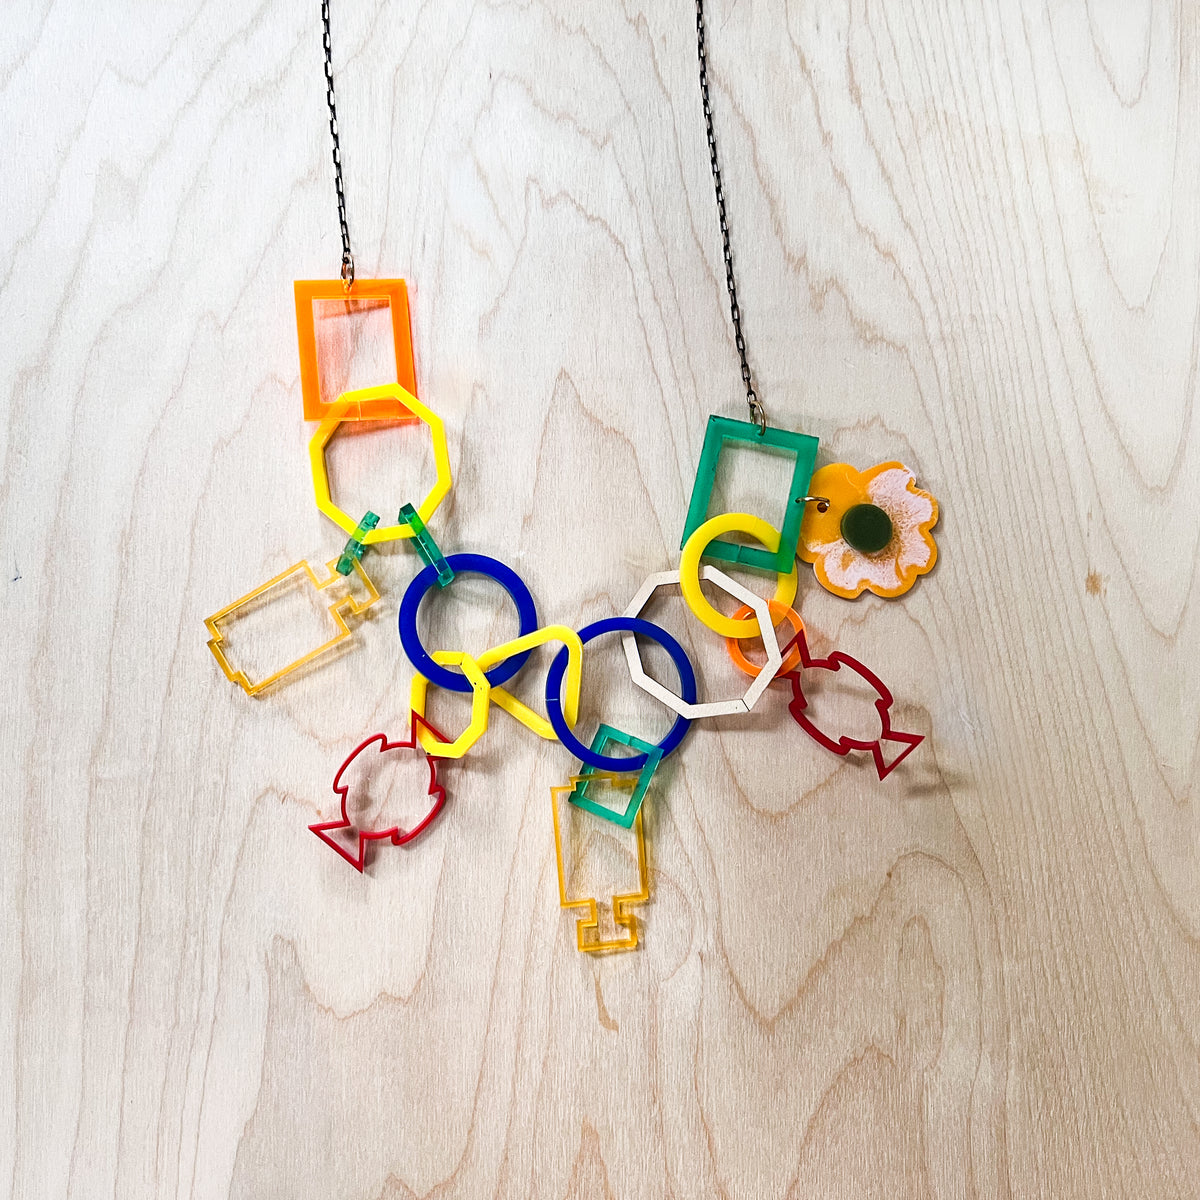 Links and Vases Necklace